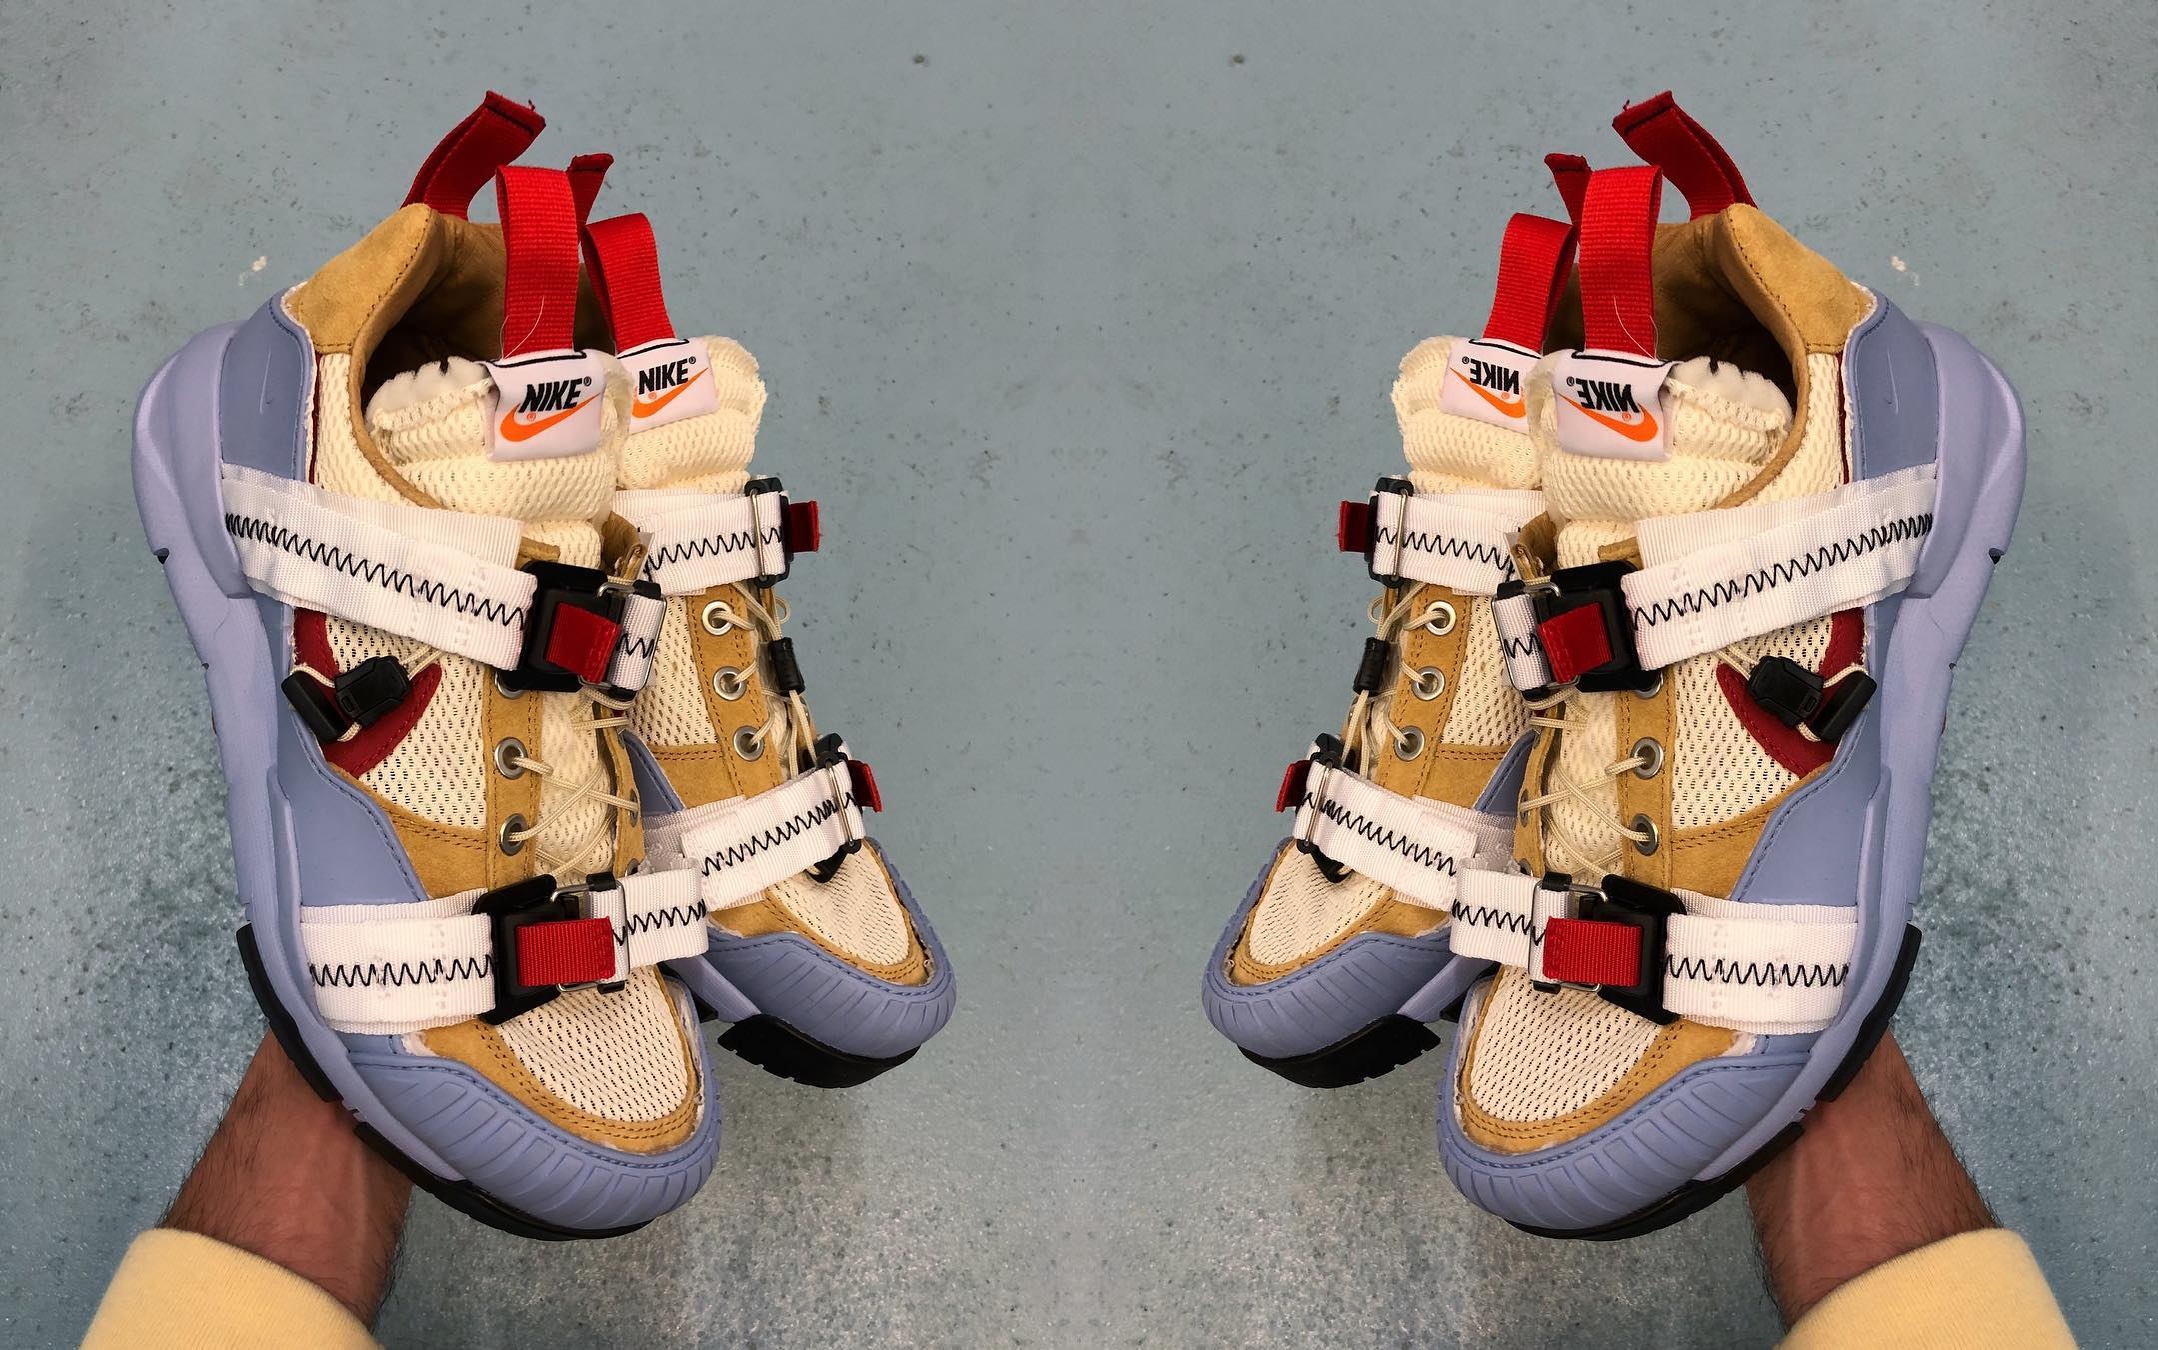 Studio Hagel Fuse Two Different Nike x Tom Sachs Sneakers for Technical Revamp